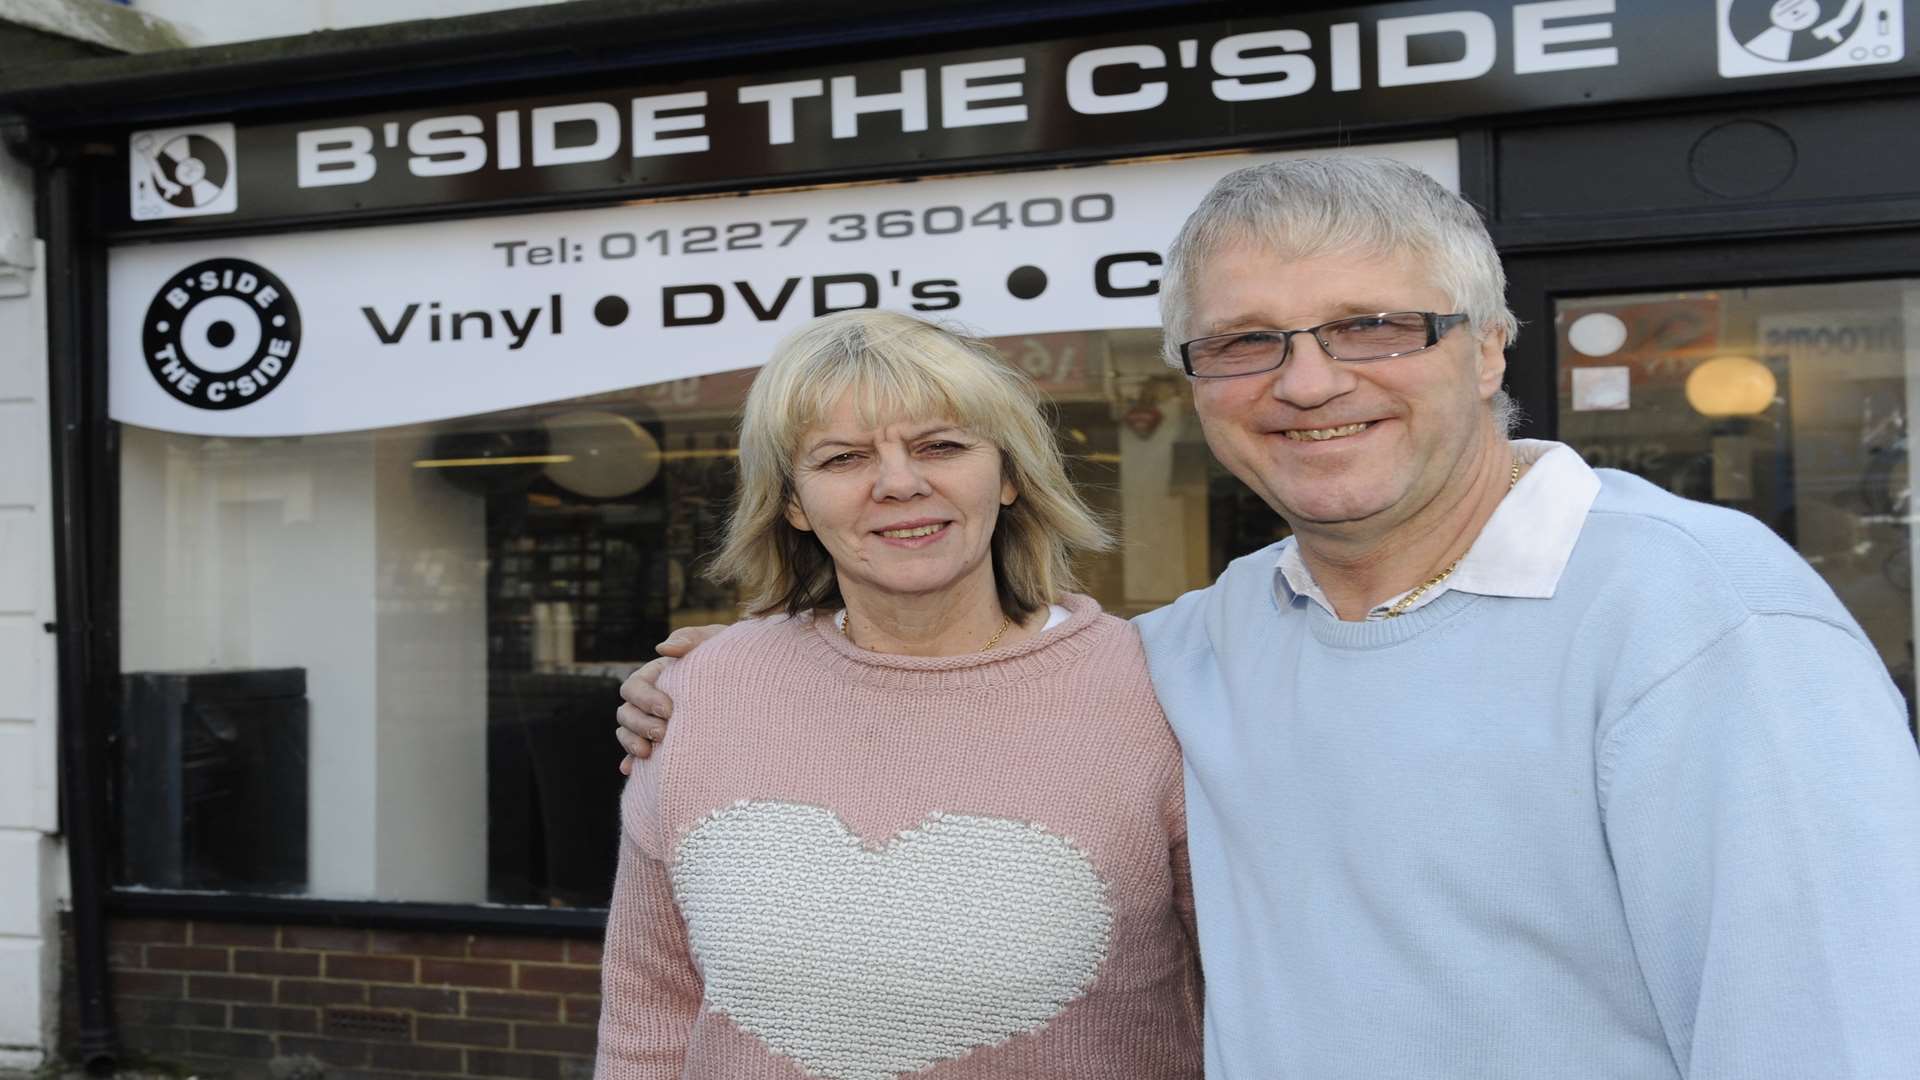 B-Side the Seaside shop - owners Chris and Oz Eastman